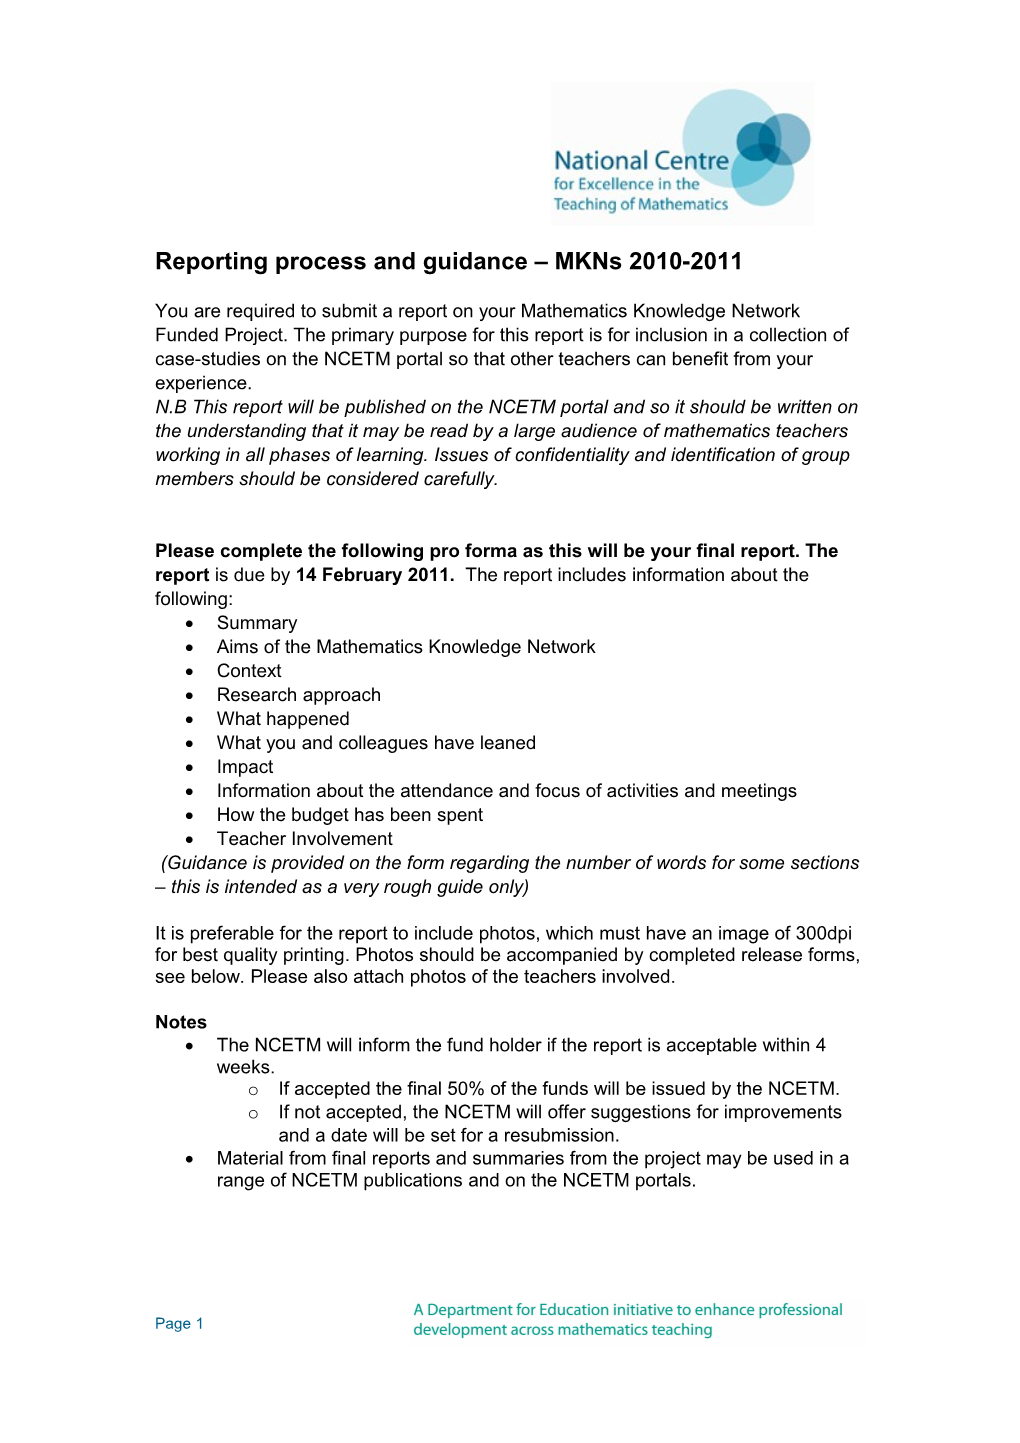 Reporting Process and Guidance Mkns 2010-2011